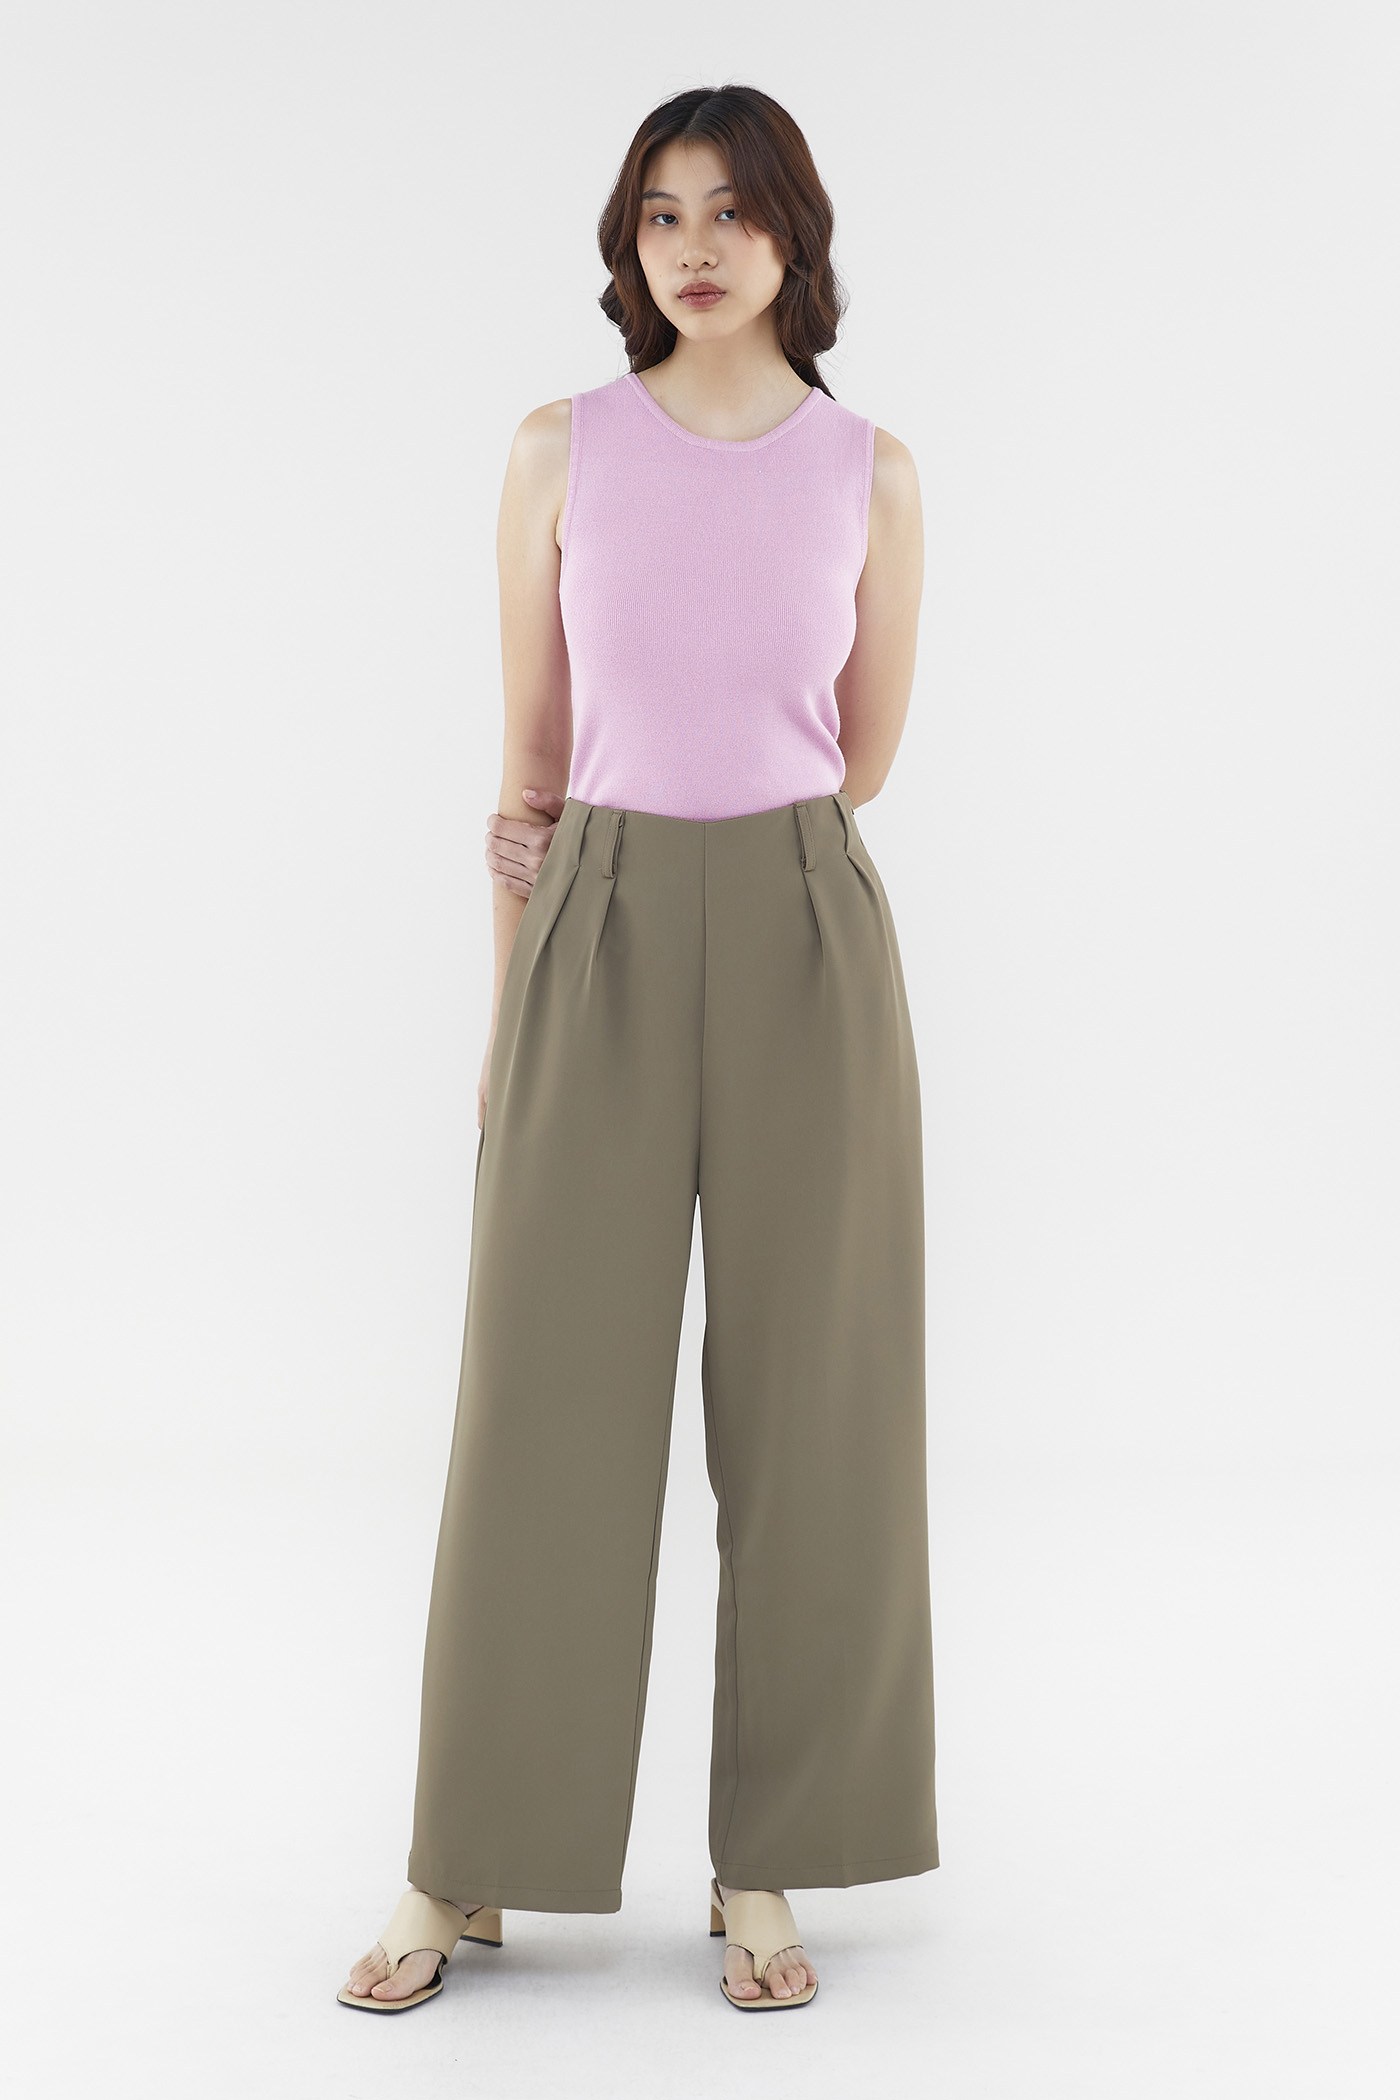 Everly Pleated Pants